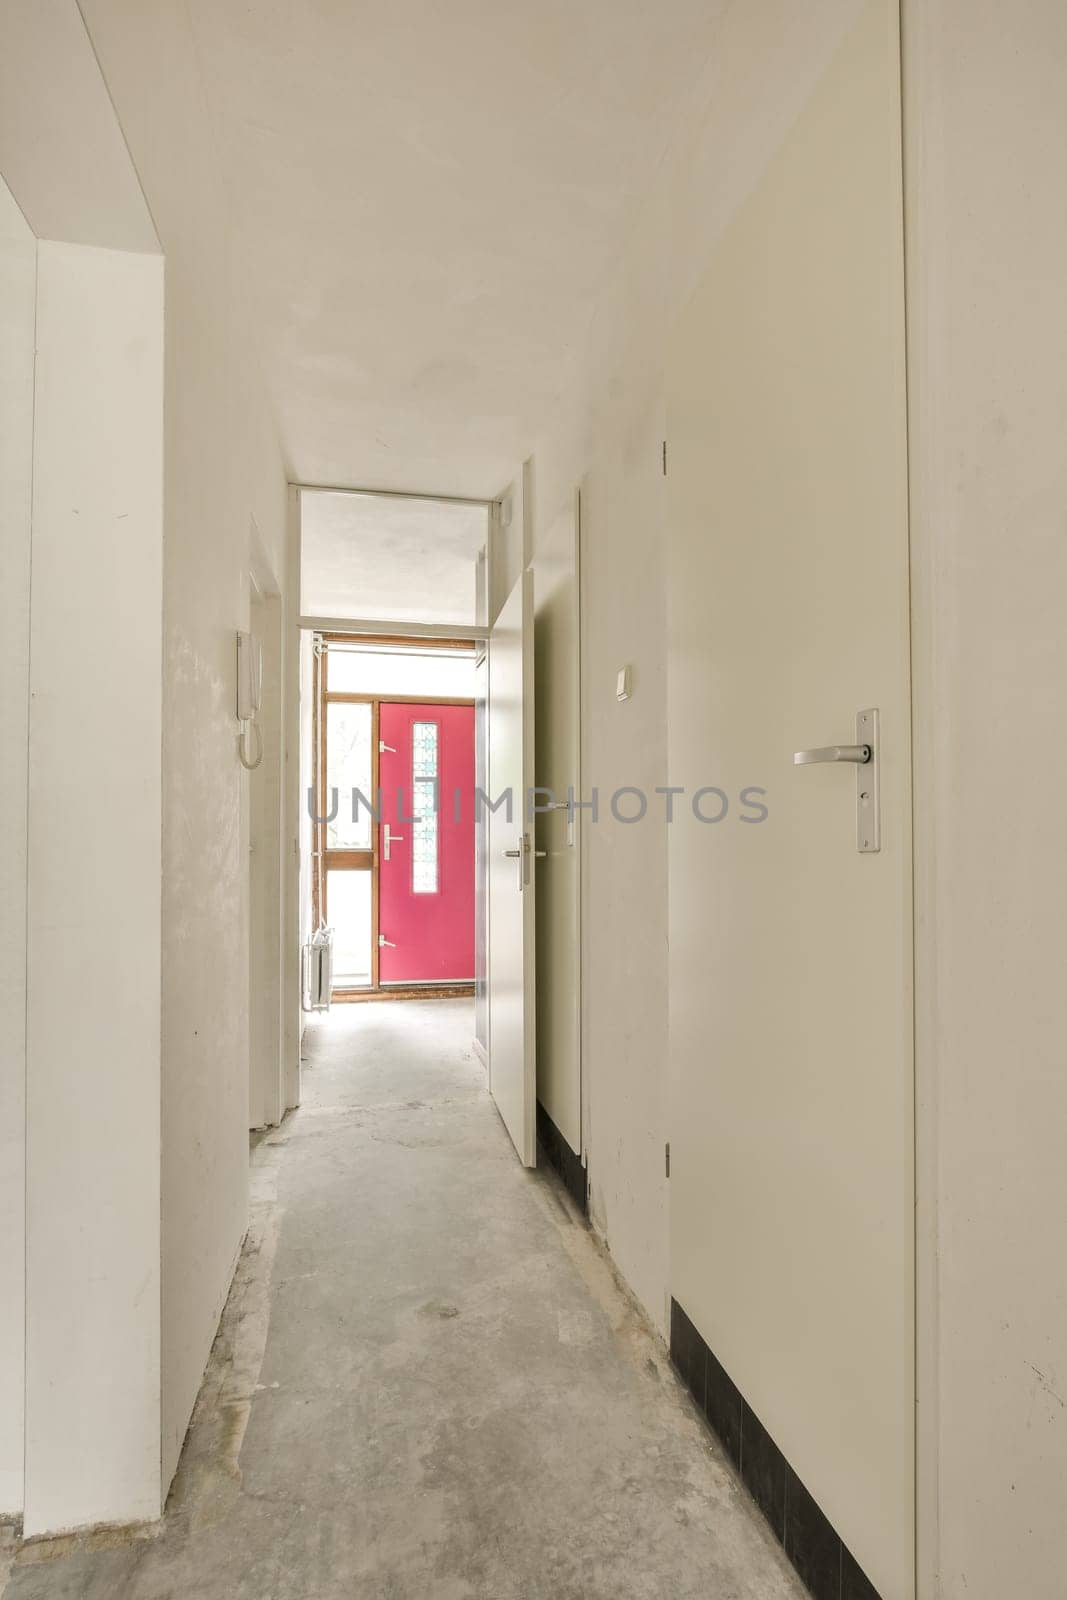 an empty room with red door and white walls in the middle of the room, there is no people or objects to be seen